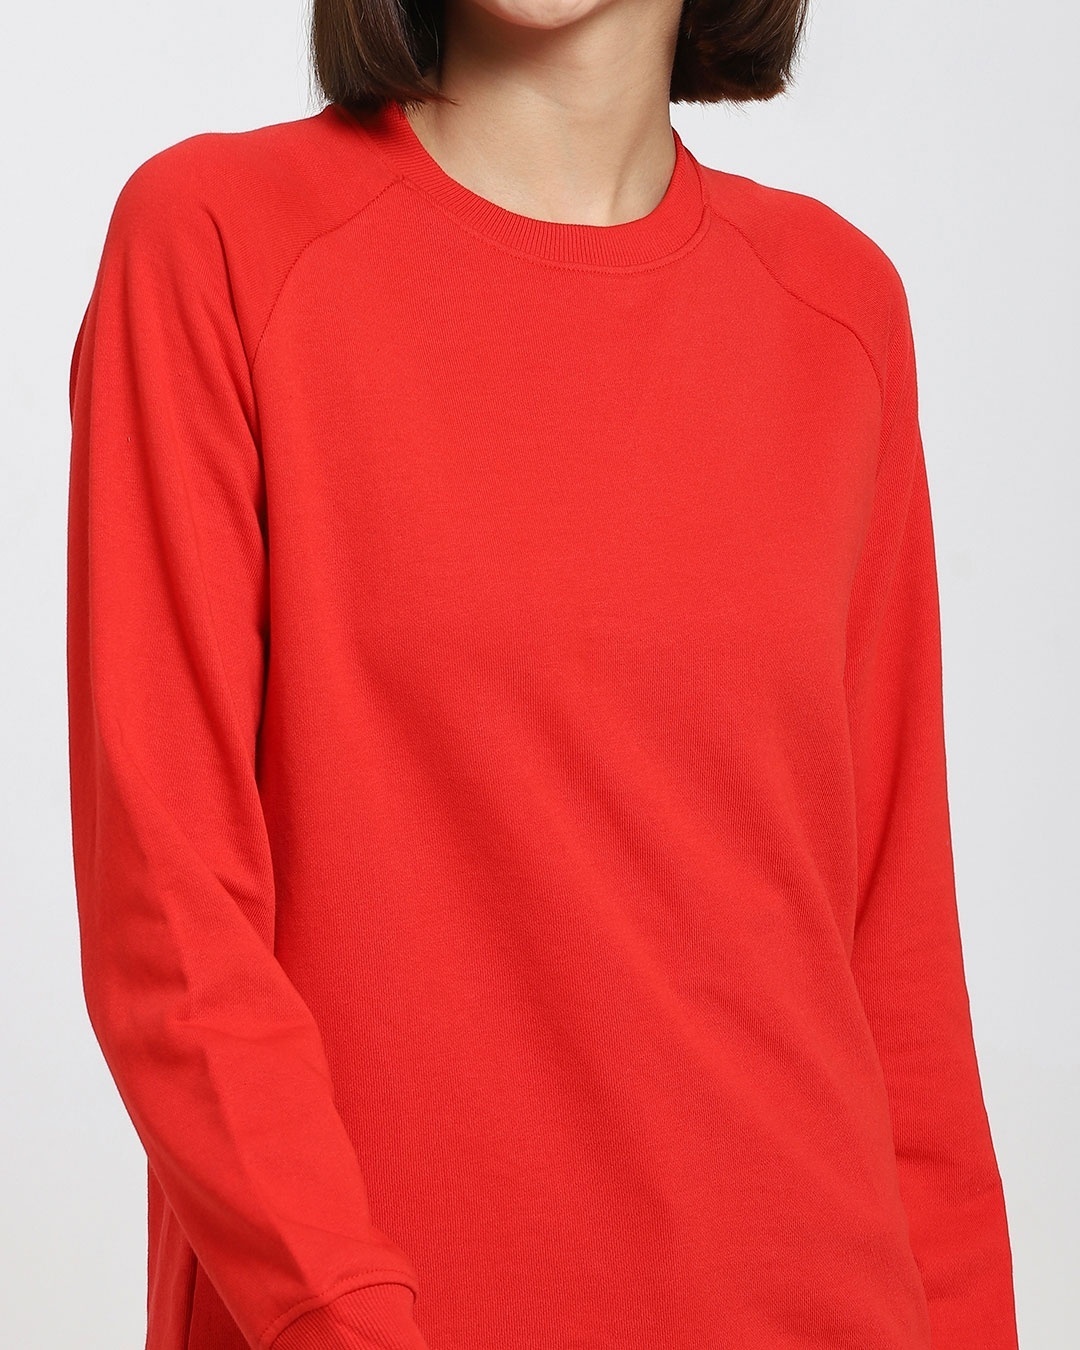 Shop High Risk Red Plus Size Solid Sweatshirt-Full